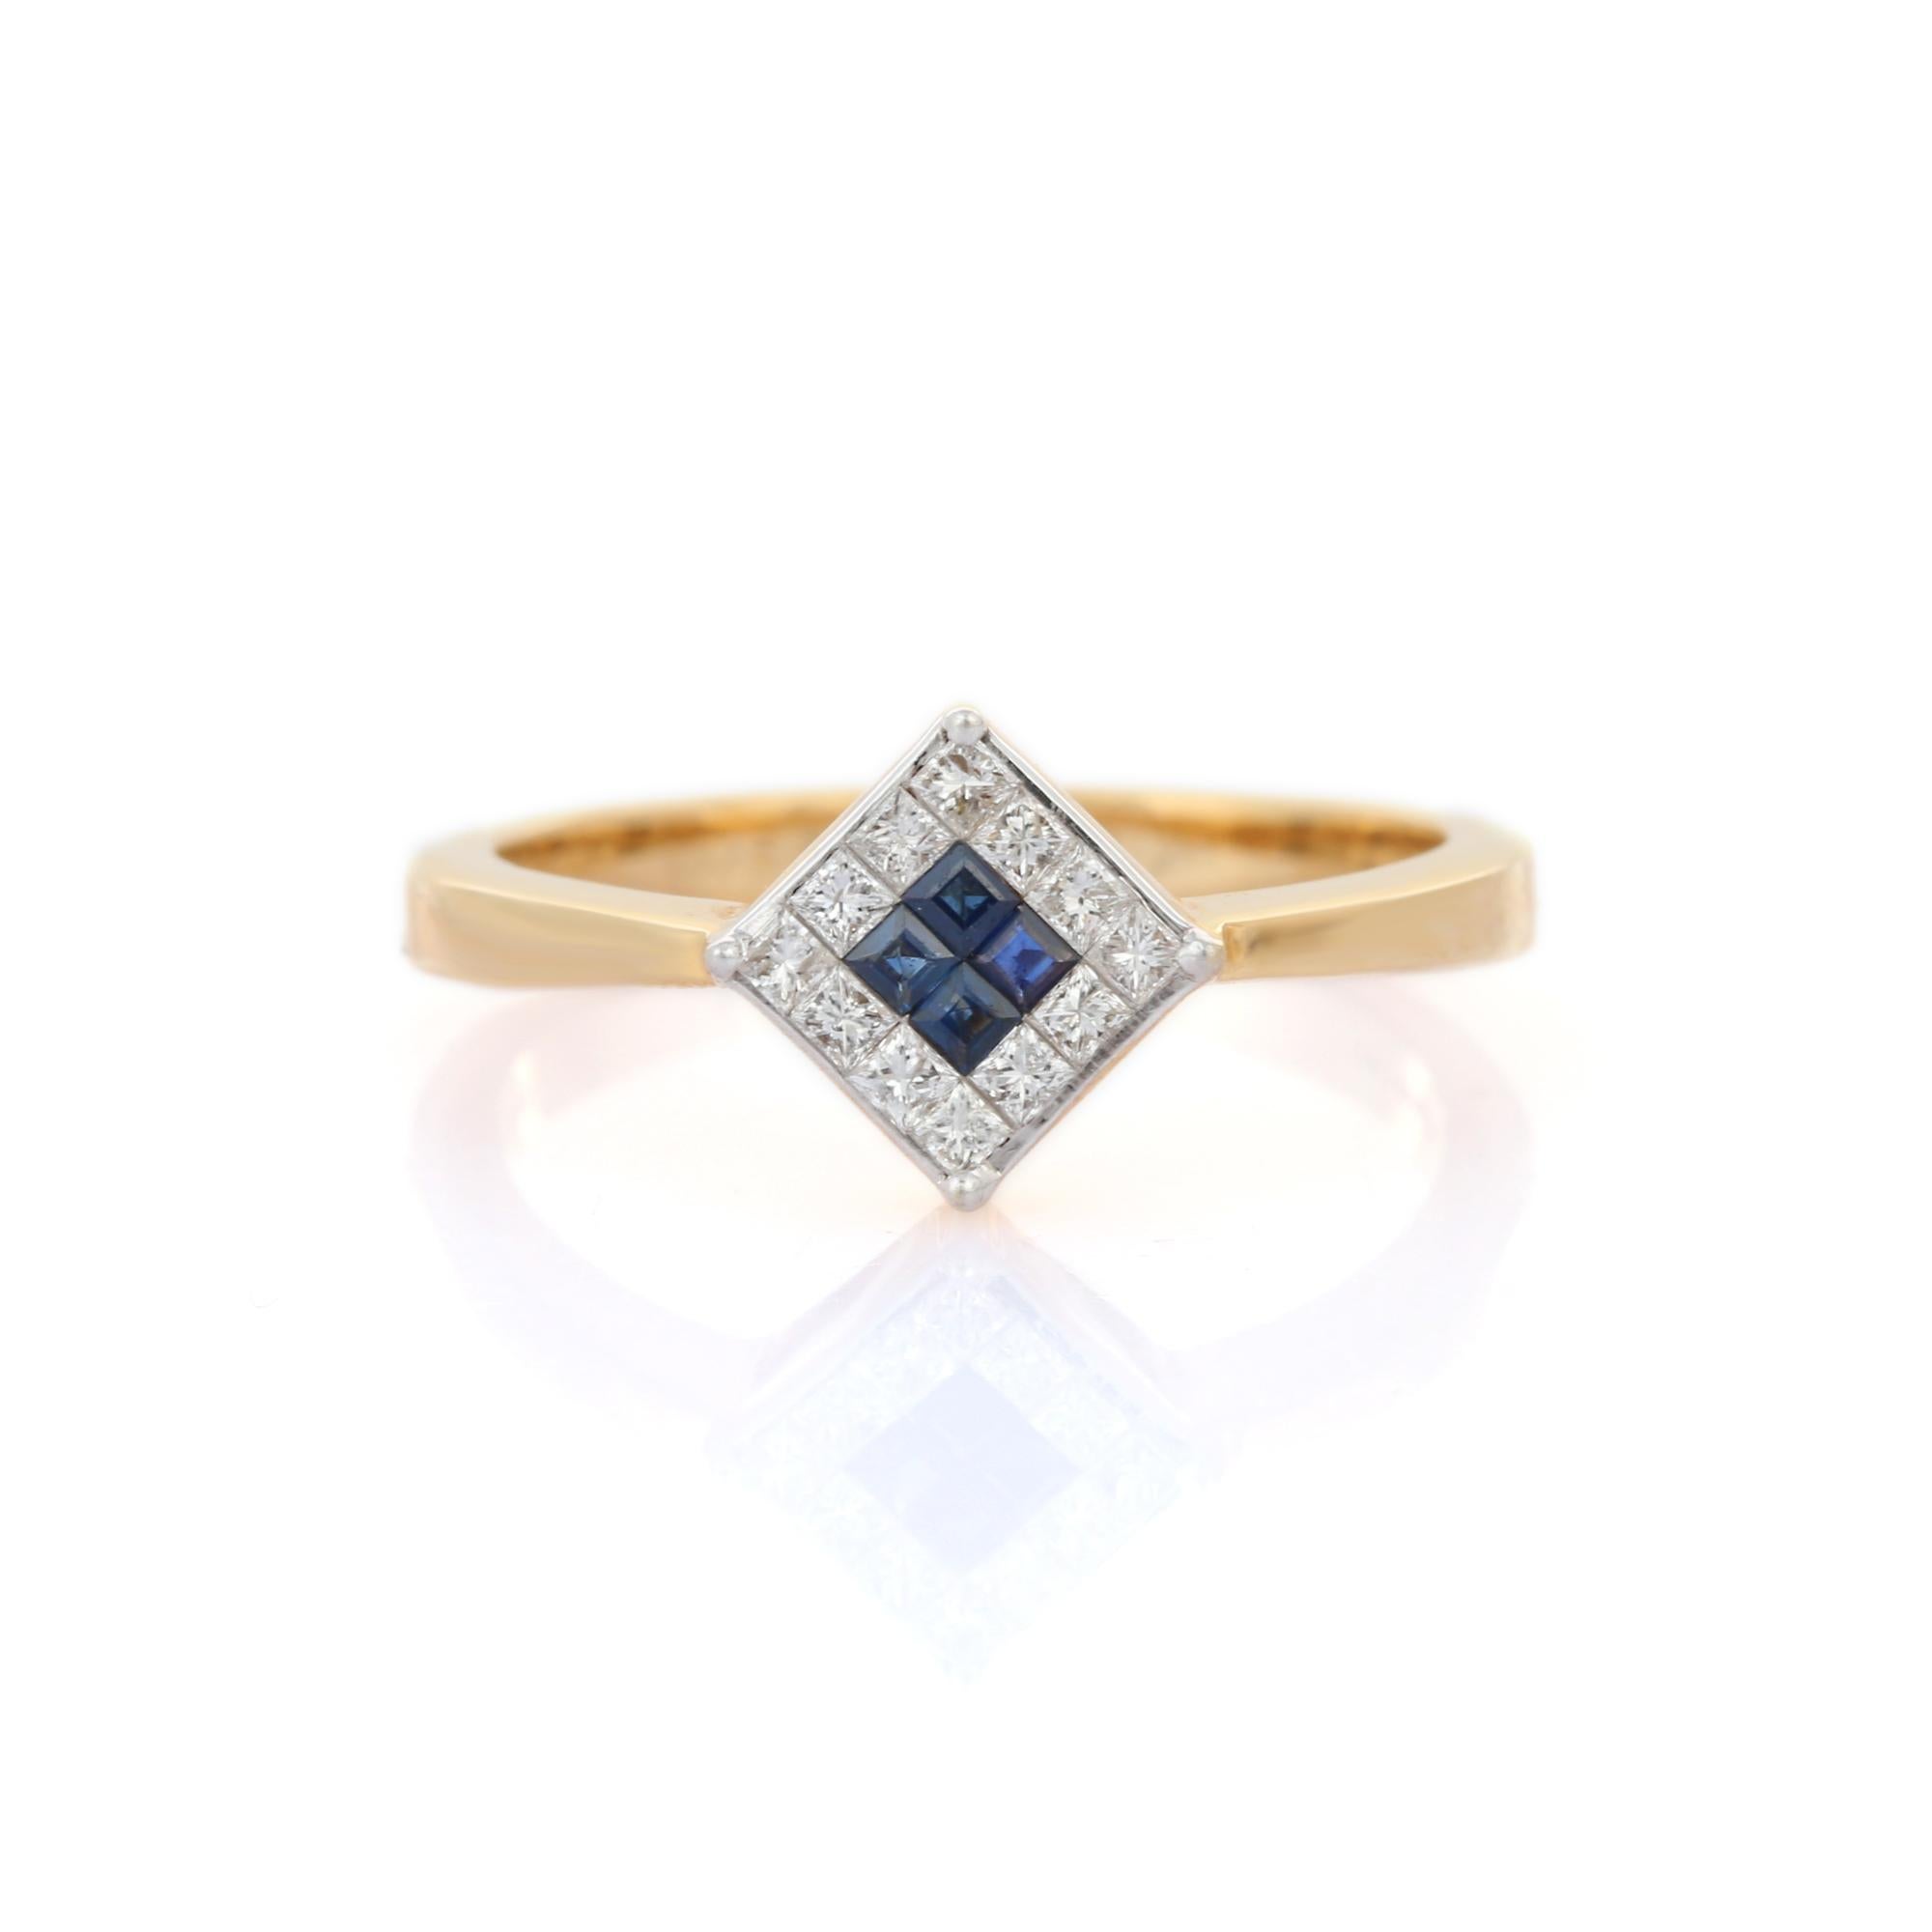 For Sale:  Natural Blue Sapphire Diamond Dainty Square Ring Set in 18k Solid Yellow Gold 2